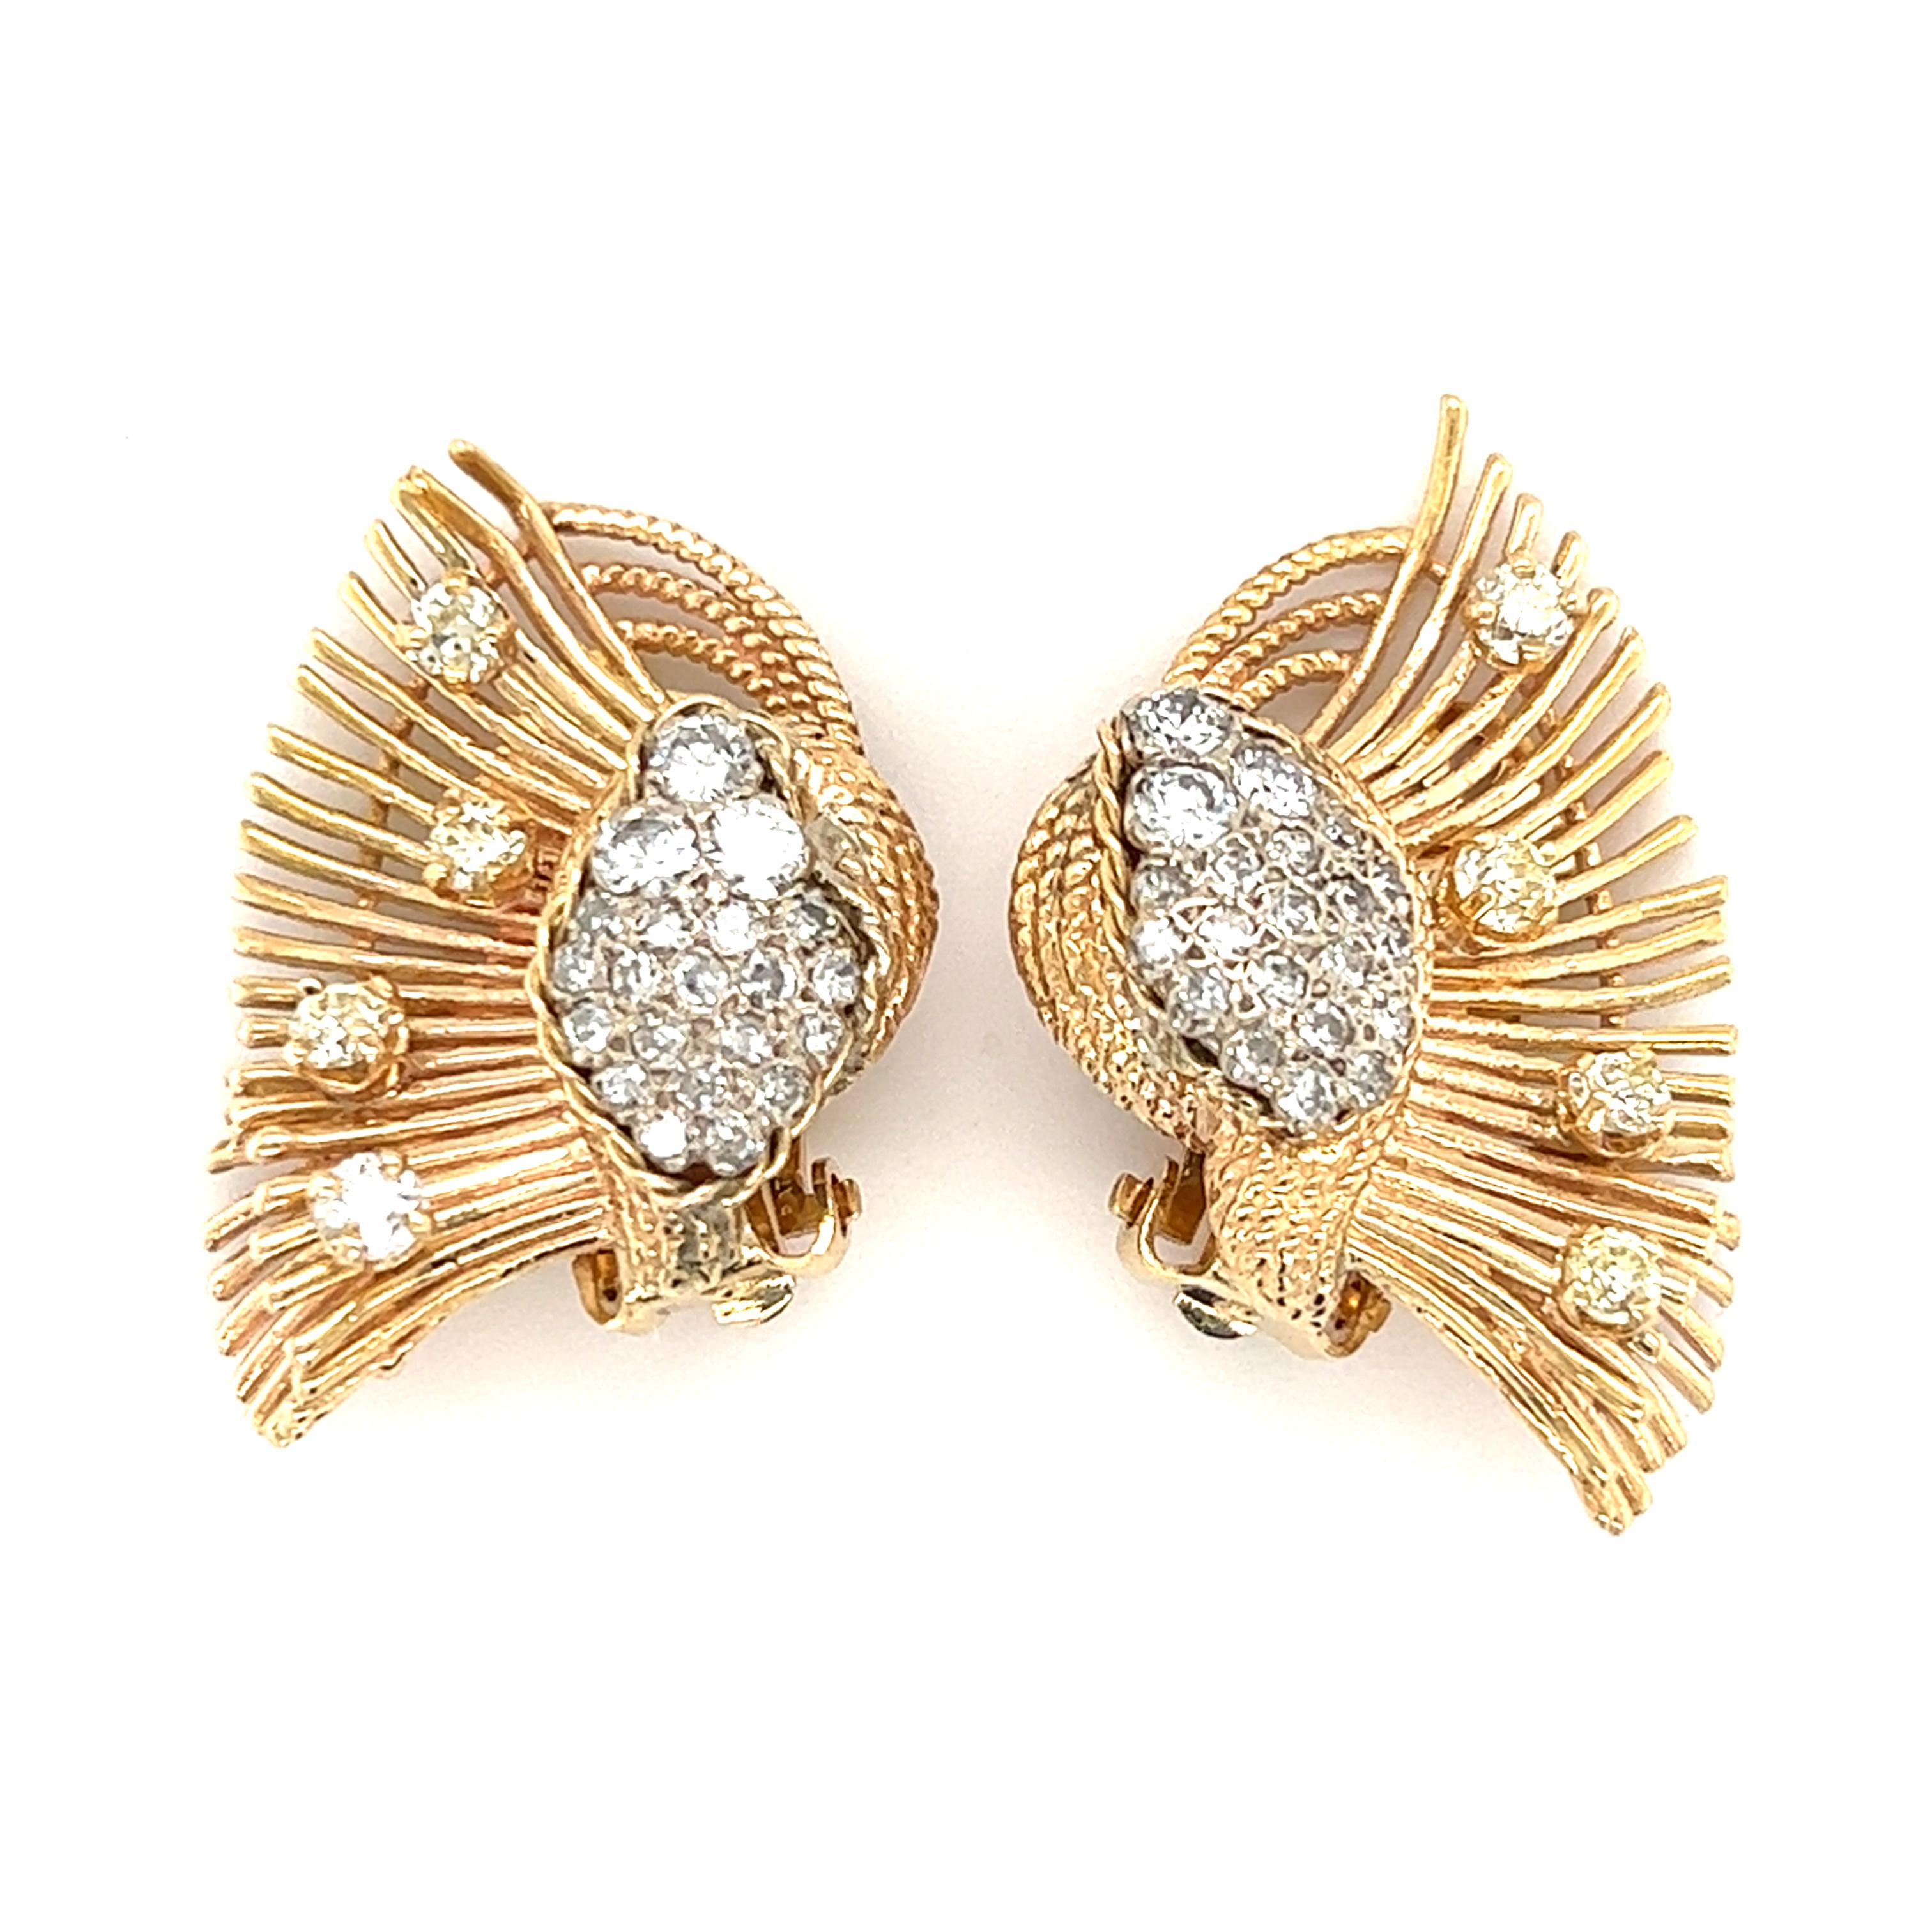 One pair of 14 karat yellow gold clip-on earrings set with forty-four (44) round brilliant cut diamonds, approximately 1.00-carat total weight with matching H/I color and SI1 clarity.  The earrings measure 1.25 inches long and 1 inch wide. 